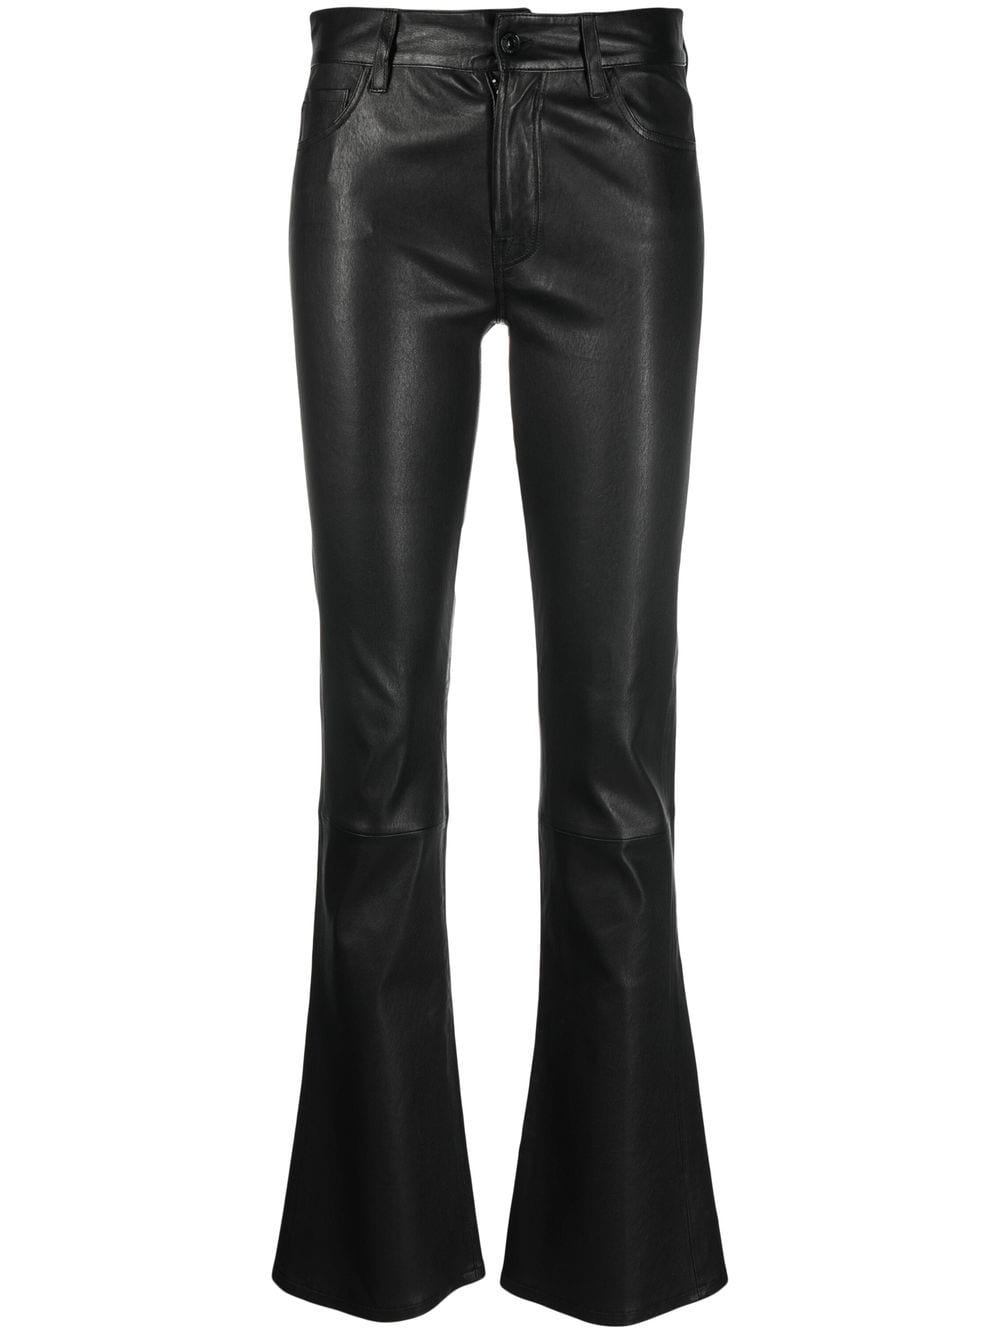 4, Muschigrell Ultra Shiny Leather Pants. You can buy this …